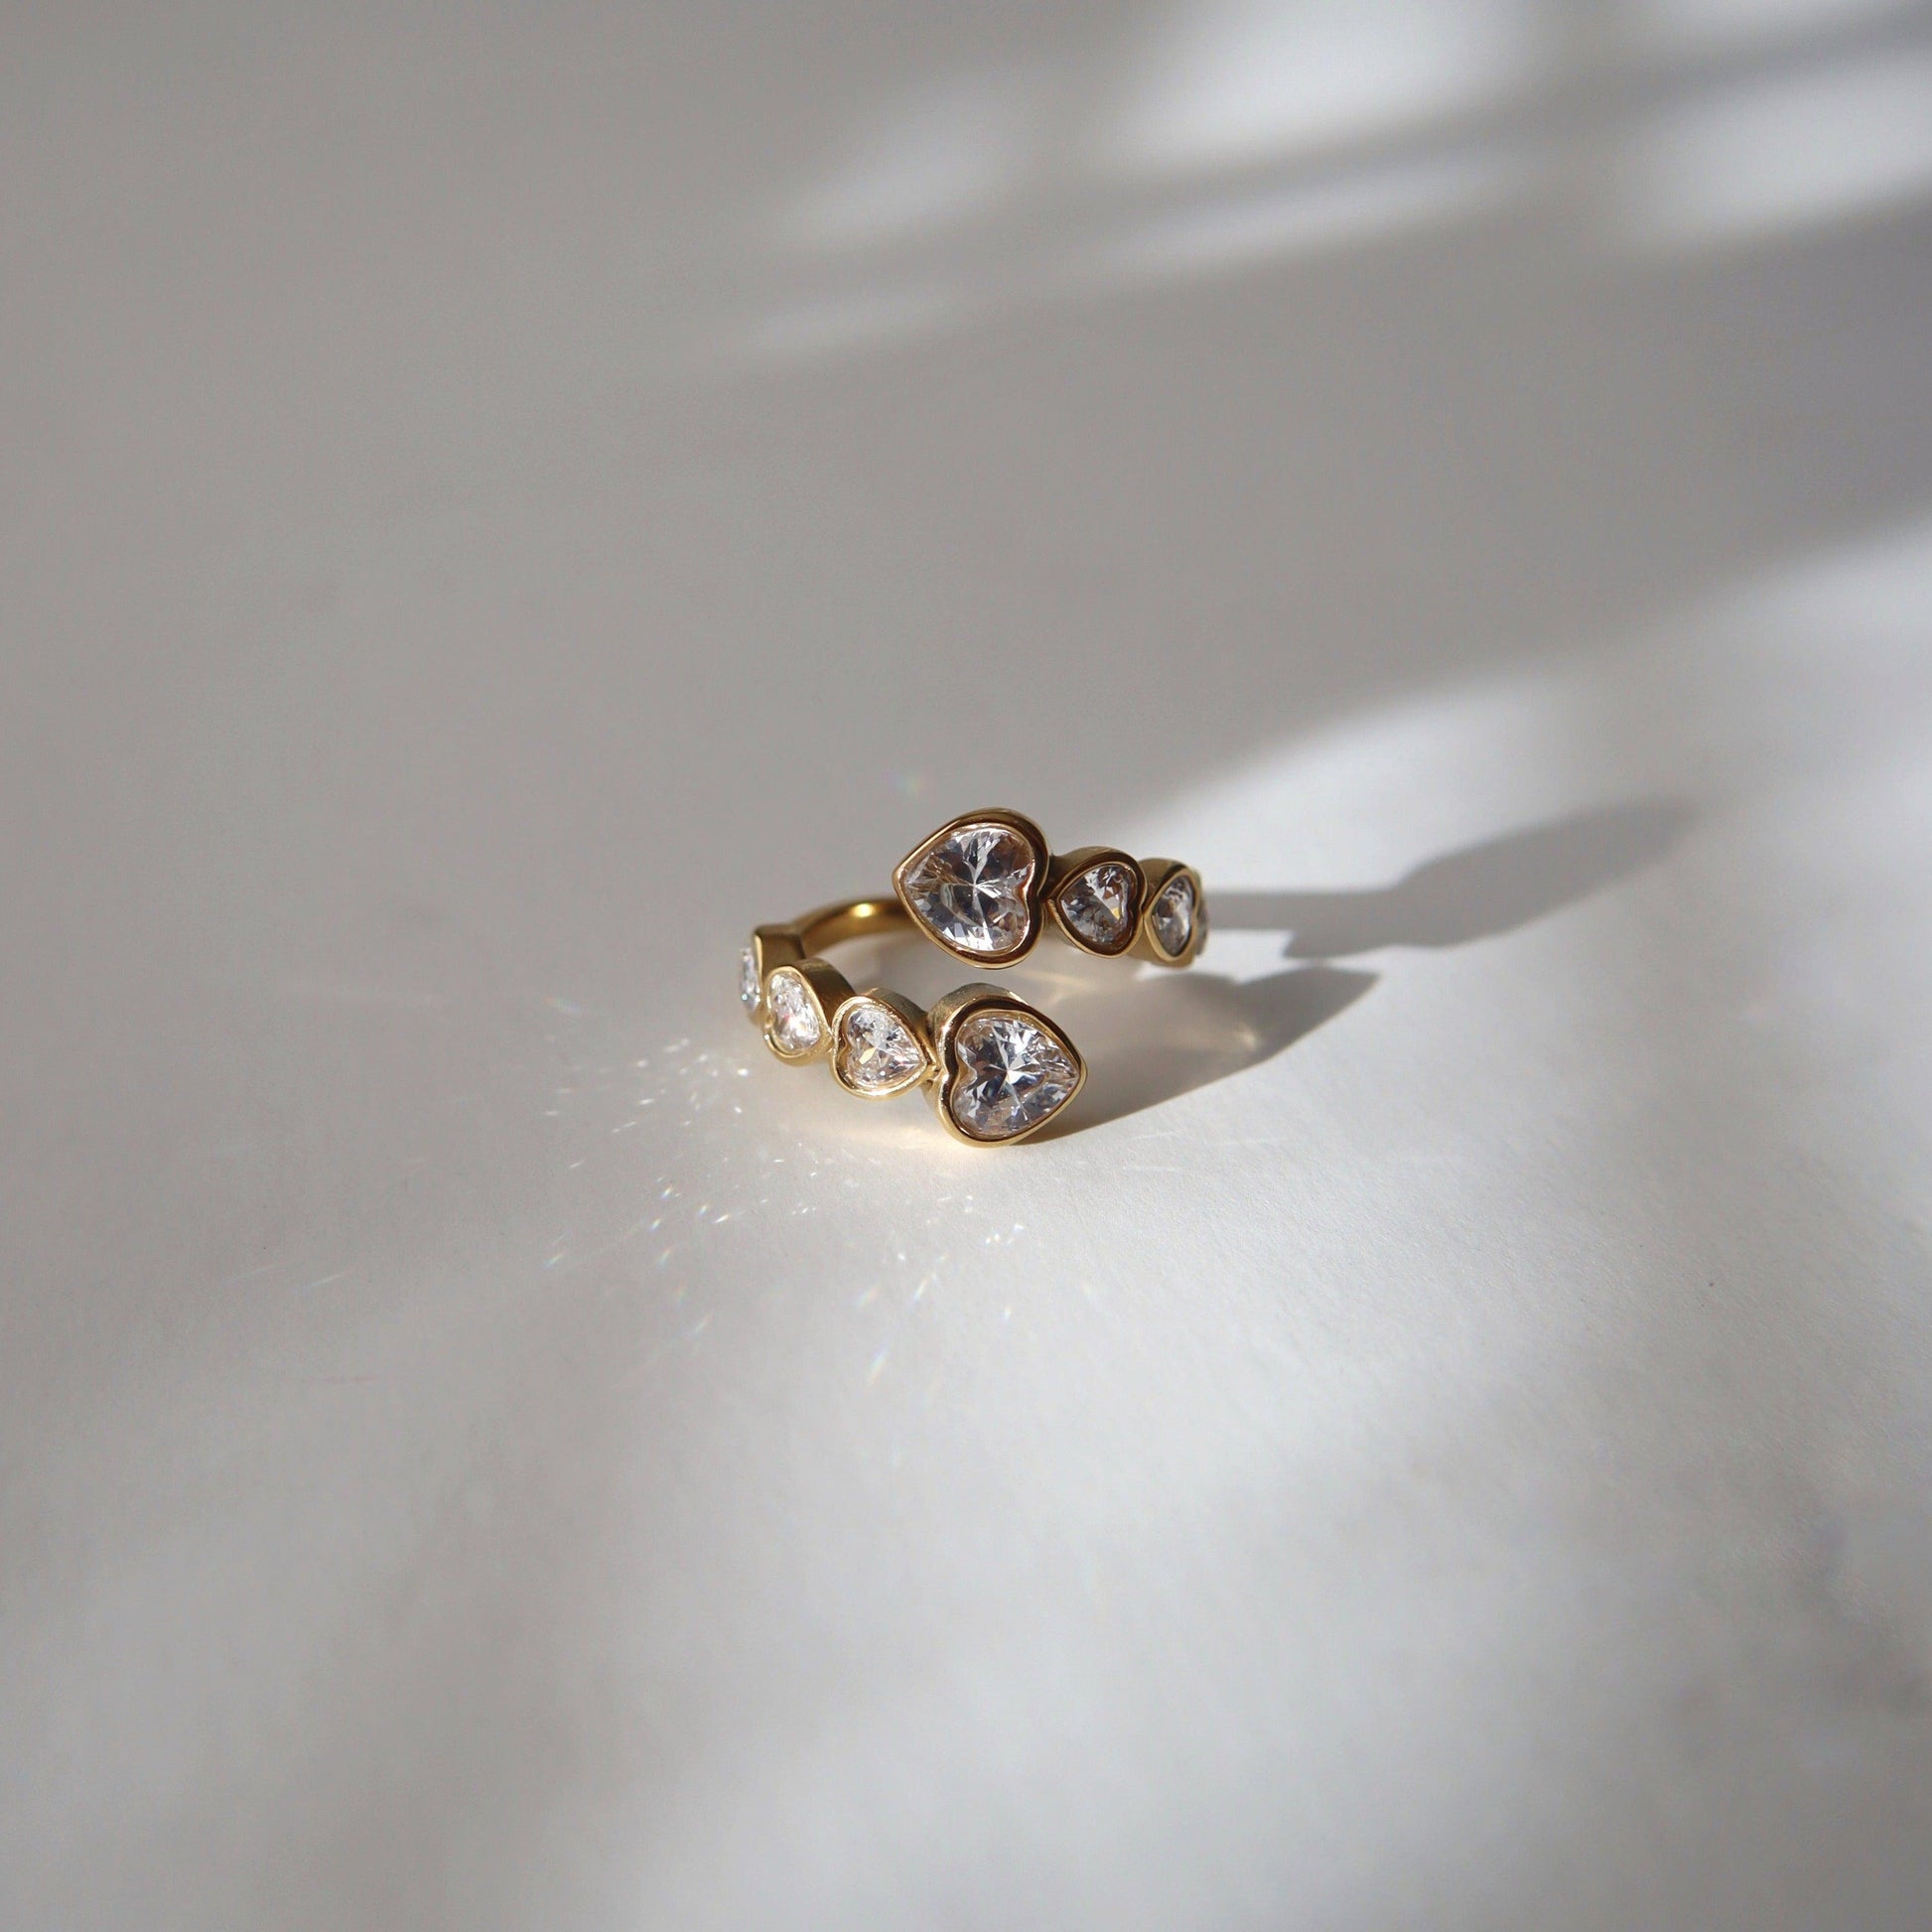 Hearts of Love Ring | Adjustable Ring - JESSA JEWELRY | GOLD JEWELRY; dainty, affordable gold everyday jewelry. Tarnish free, water-resistant, hypoallergenic. Jewelry for everyday wear